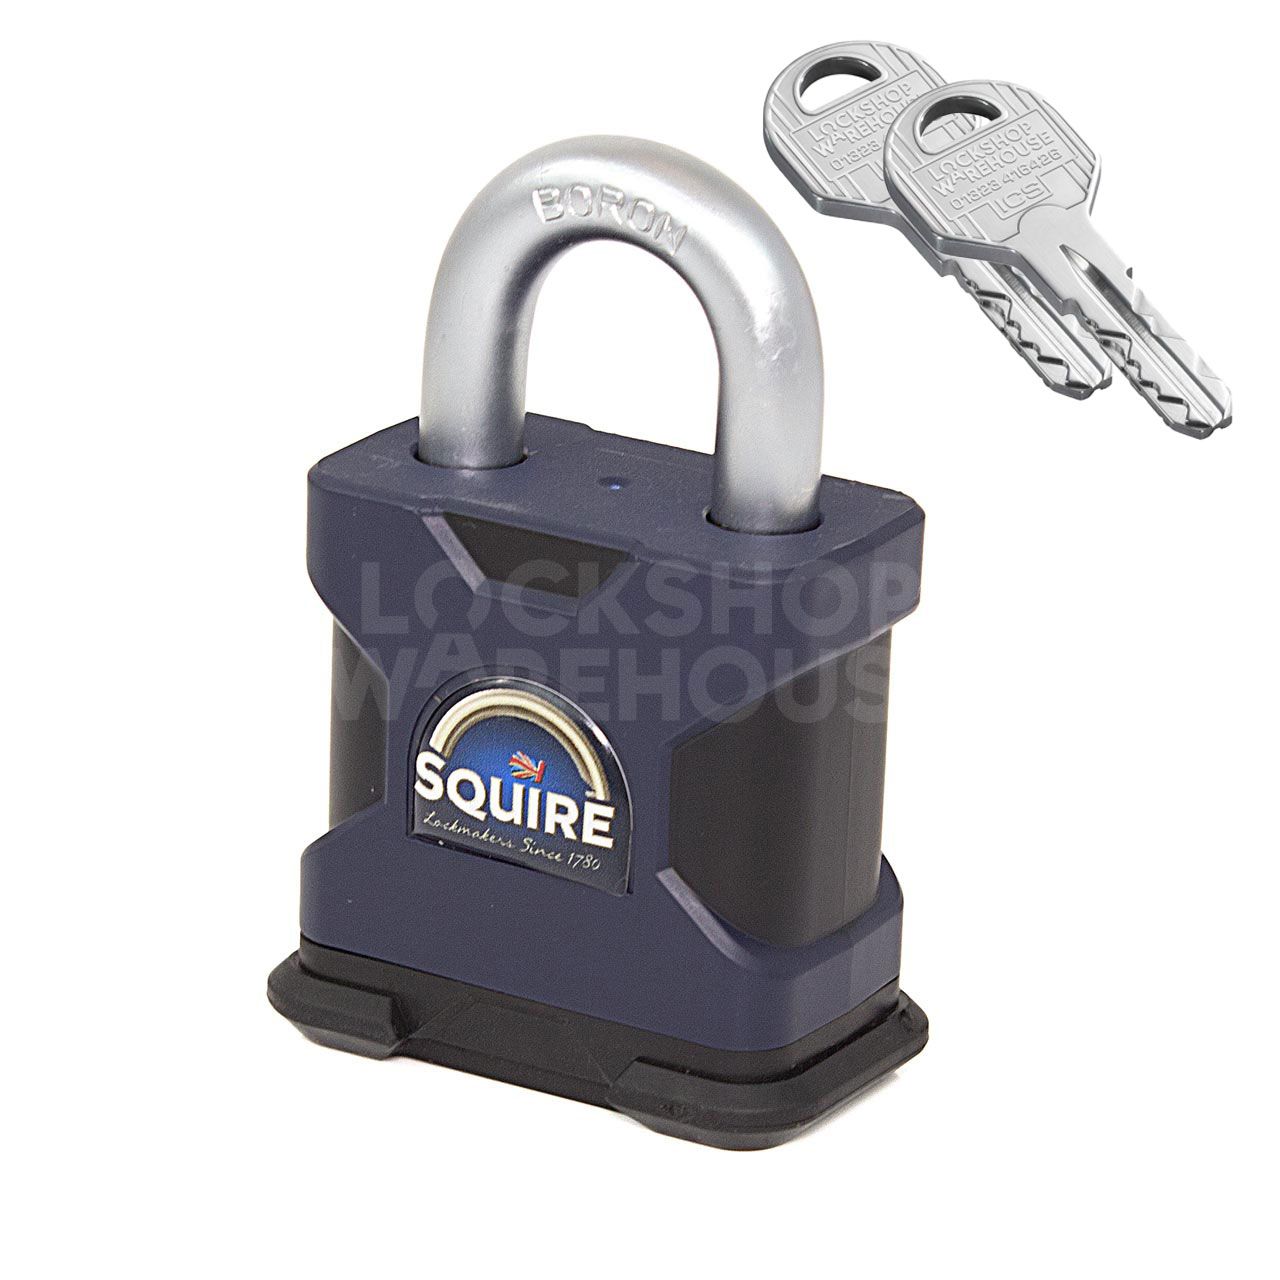 SQUIRE Stronghold® SS50S Padlock with EVVA ICS key - Fully Protected key